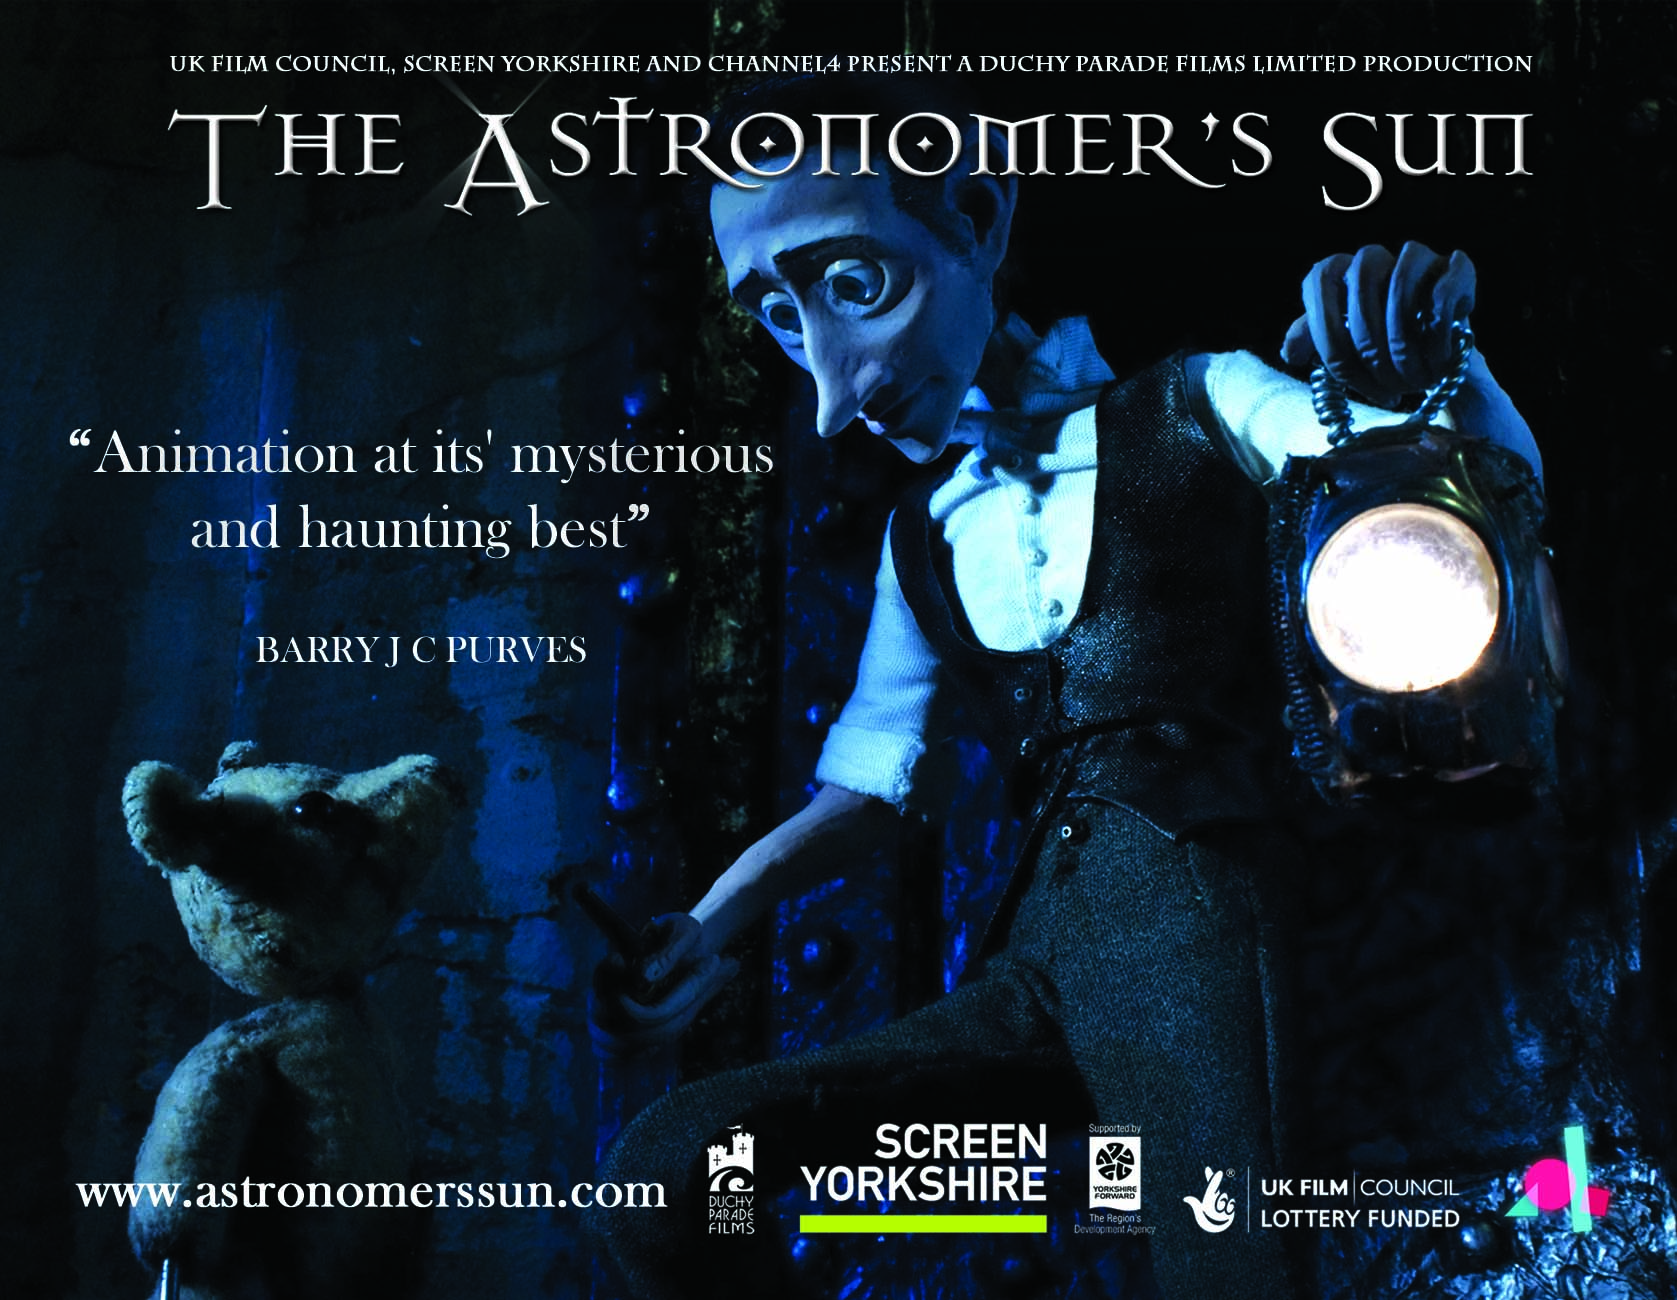 The Astronomer's Sun - stop motion animation. Produced by Duchy Parade Films Ltd, 2010